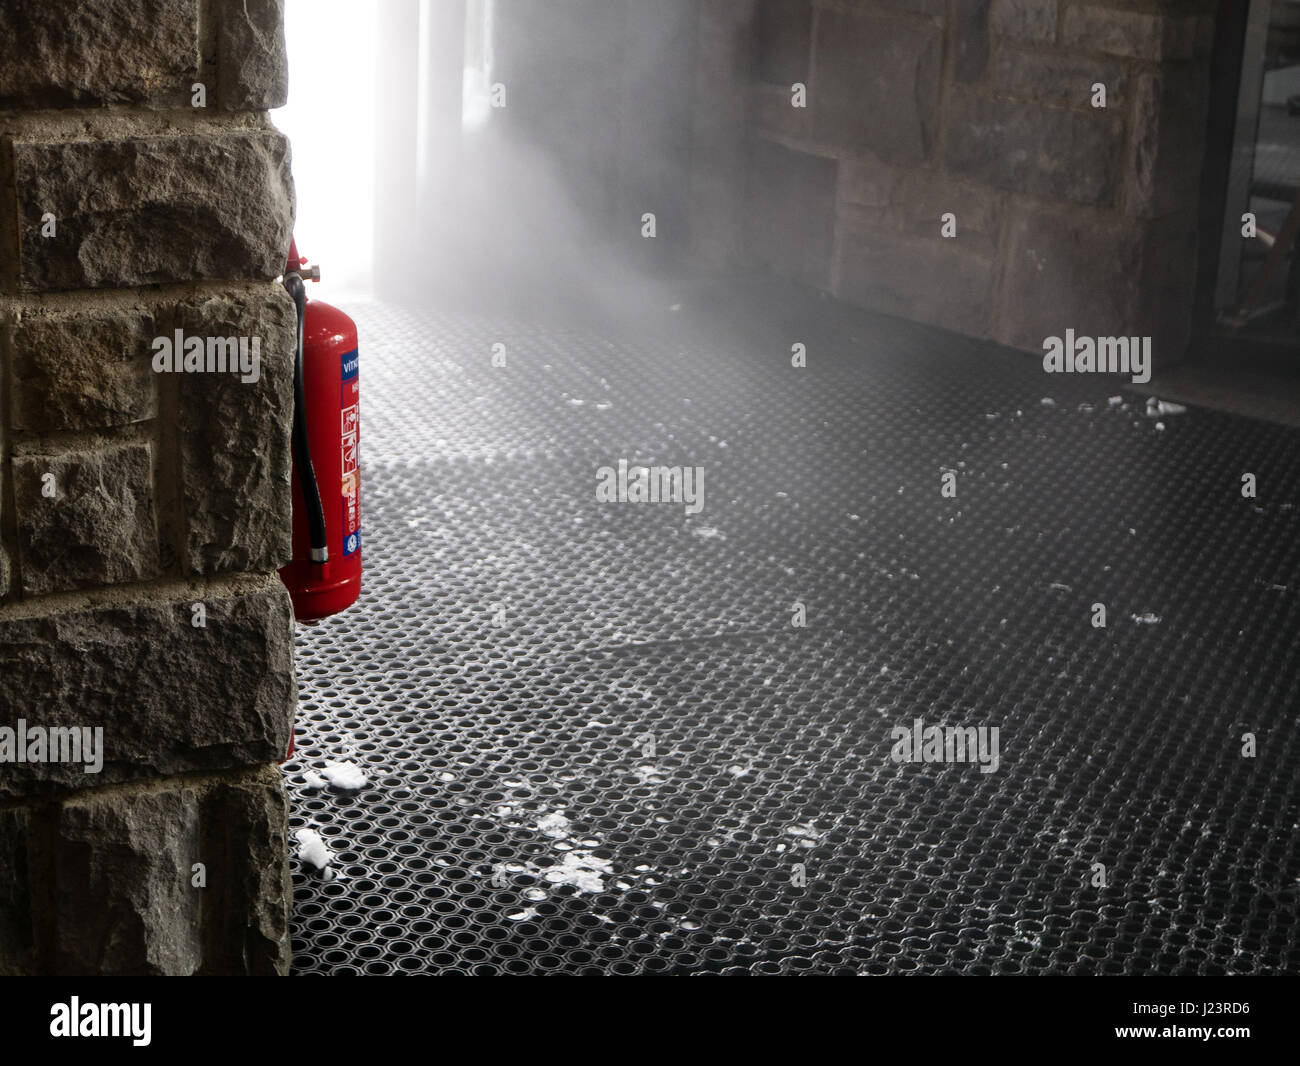 Fire extinguisher hang on the wall, cloud of mist look like smoke, comes through the door. Stock Photo